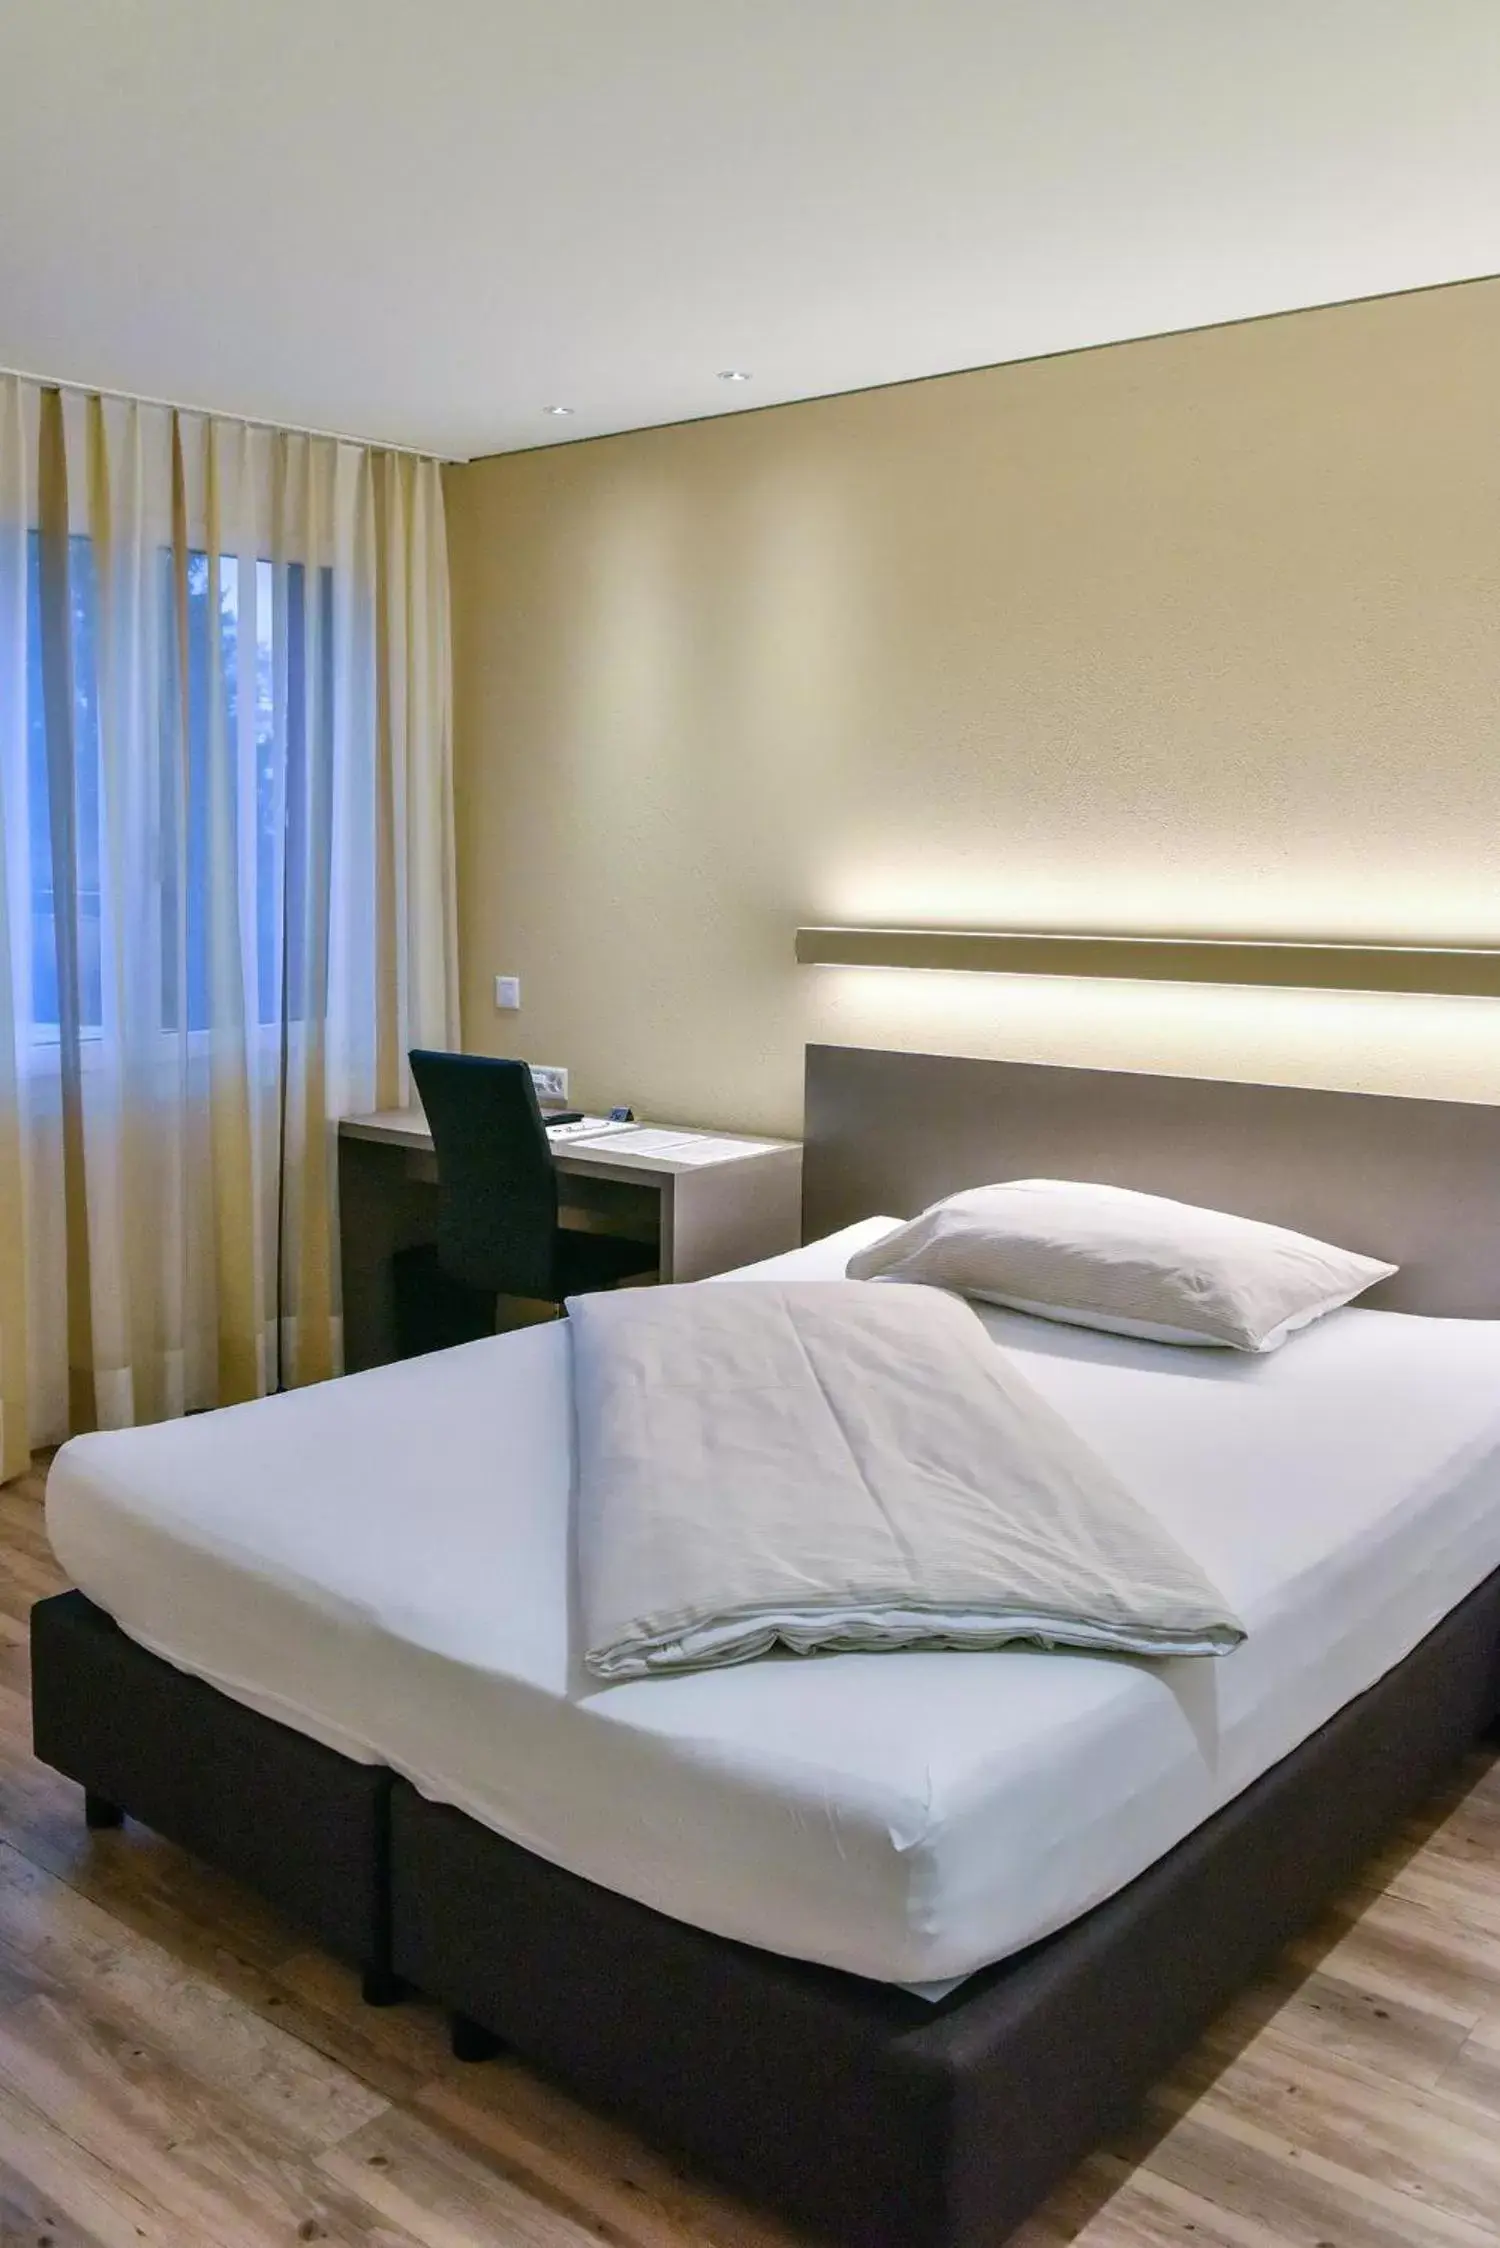 Bed in Hotel am Kreisel: Self-Service Check-In Hotel